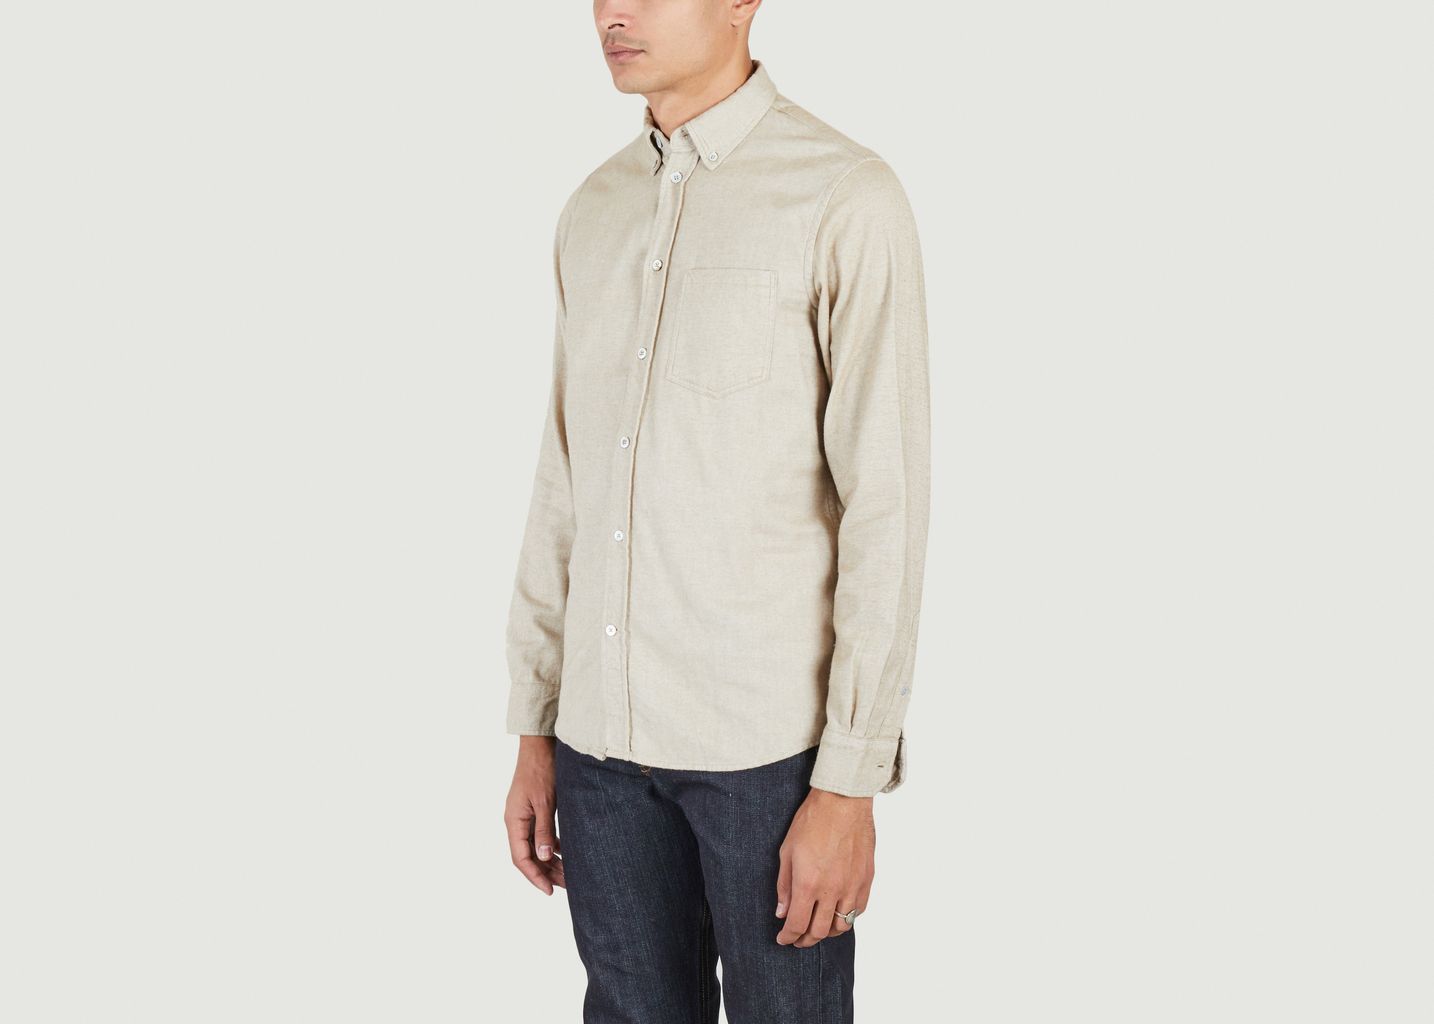 Anton brushed flannel shirt - Norse Projects